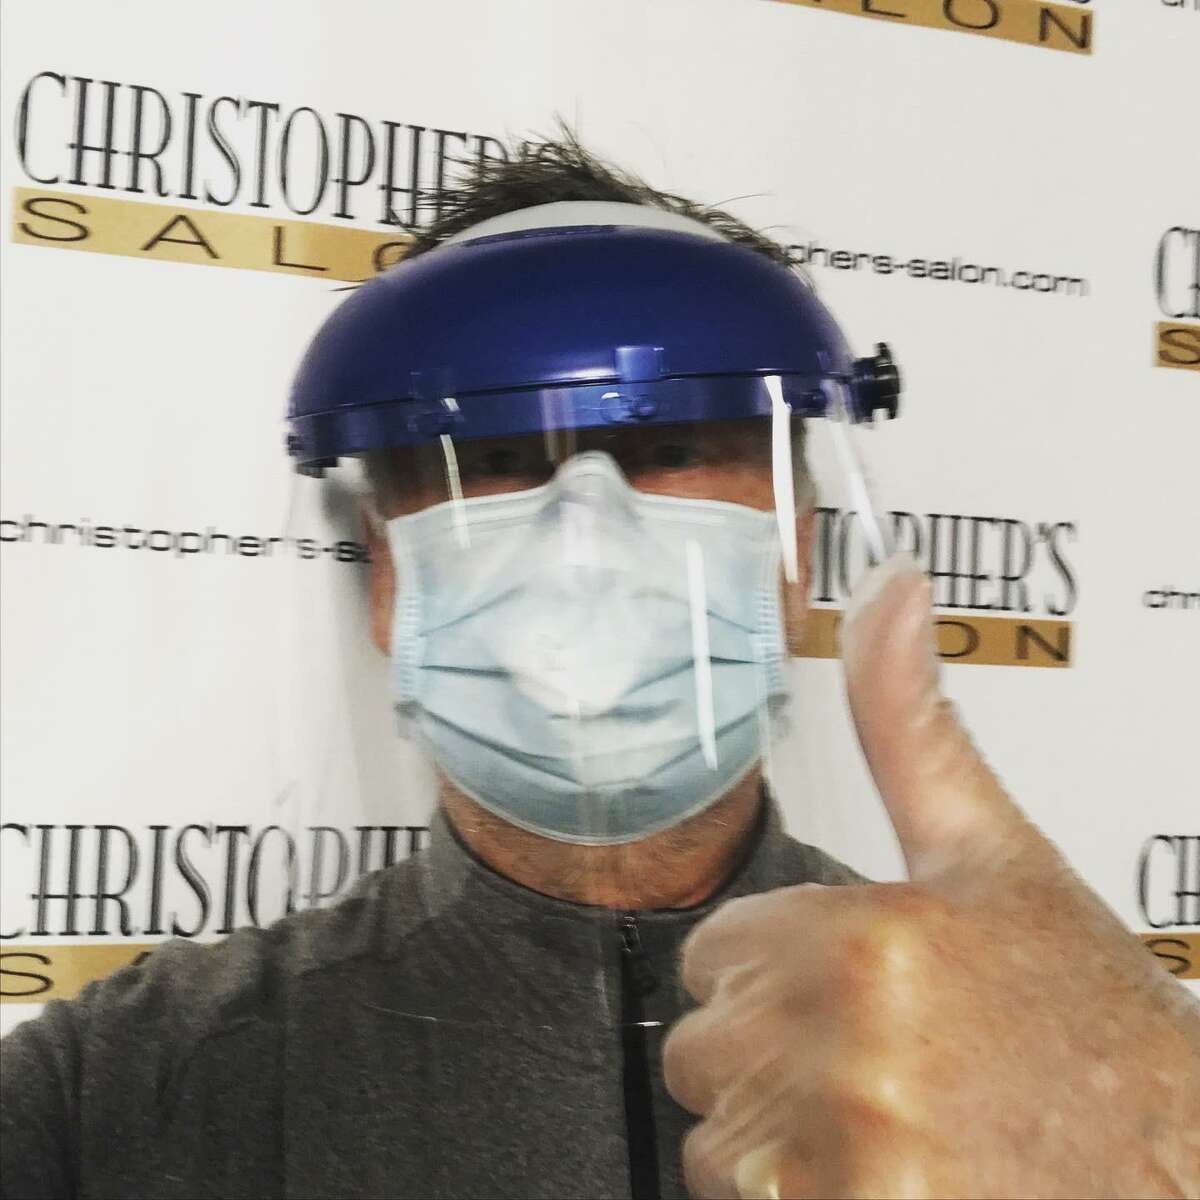 Christopher's Salon owner Christopher Rollins models the protective gear he planned to use in the salon on reopening Wednesday.